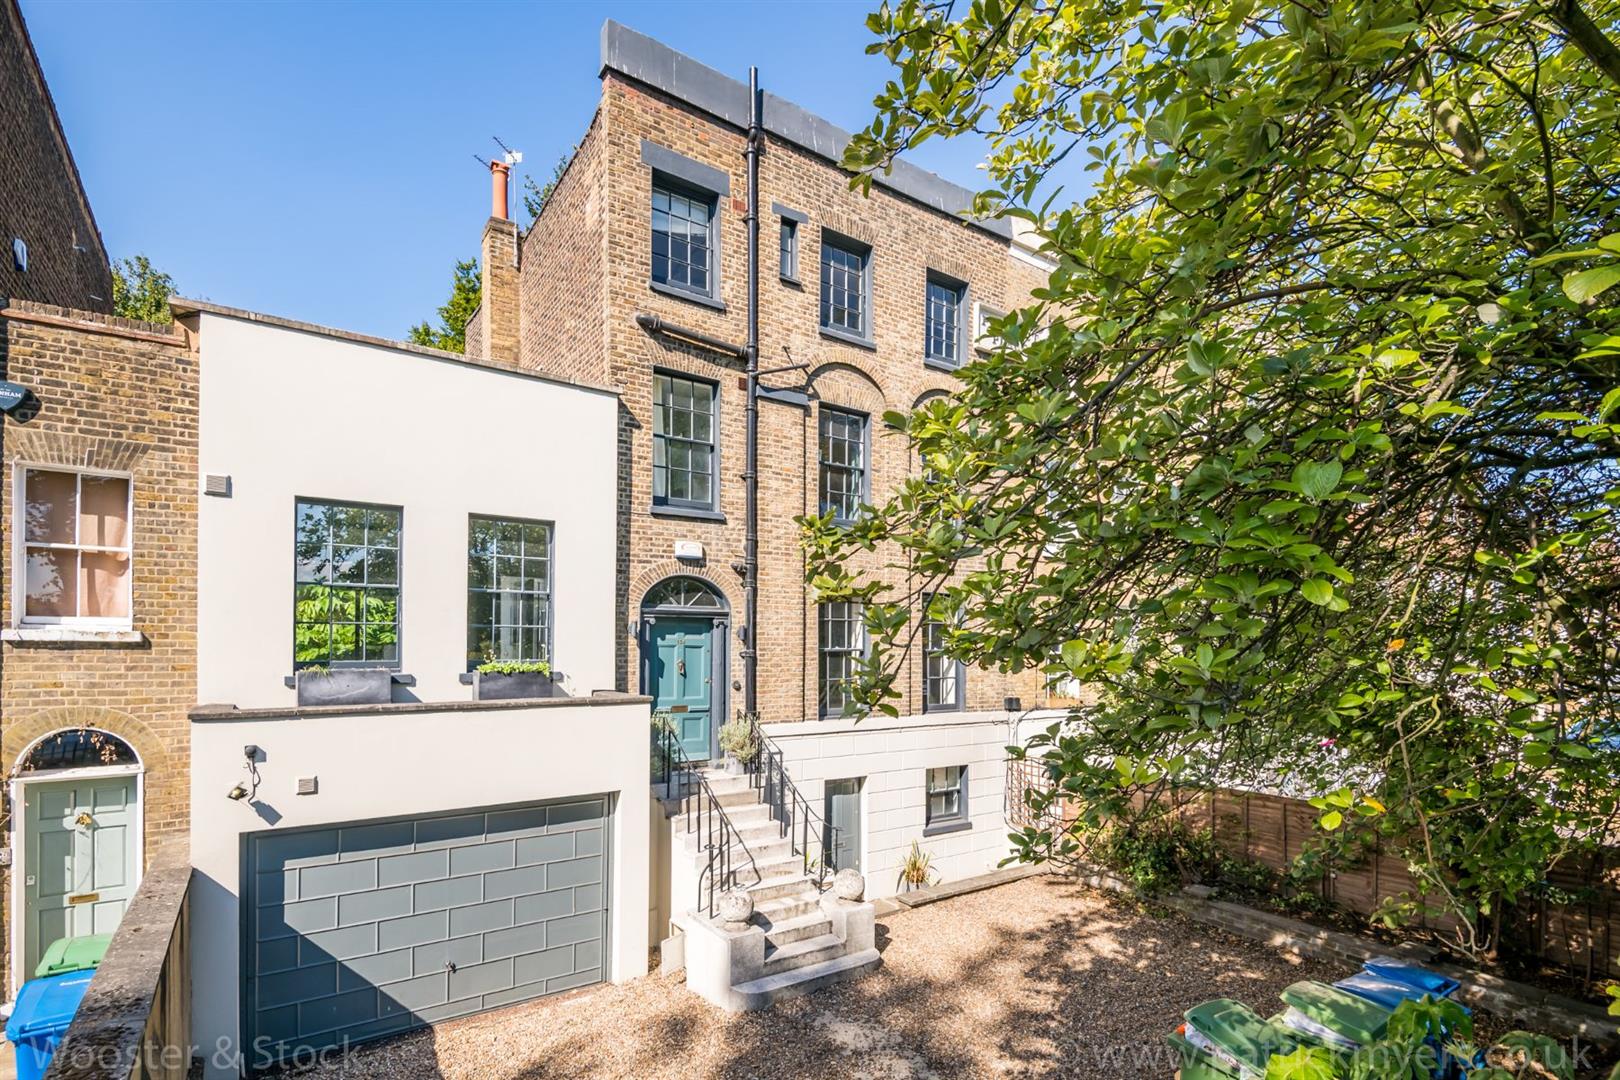 House - Detached Sold in Peckham Rye, East Dulwich, SE22 877 view1